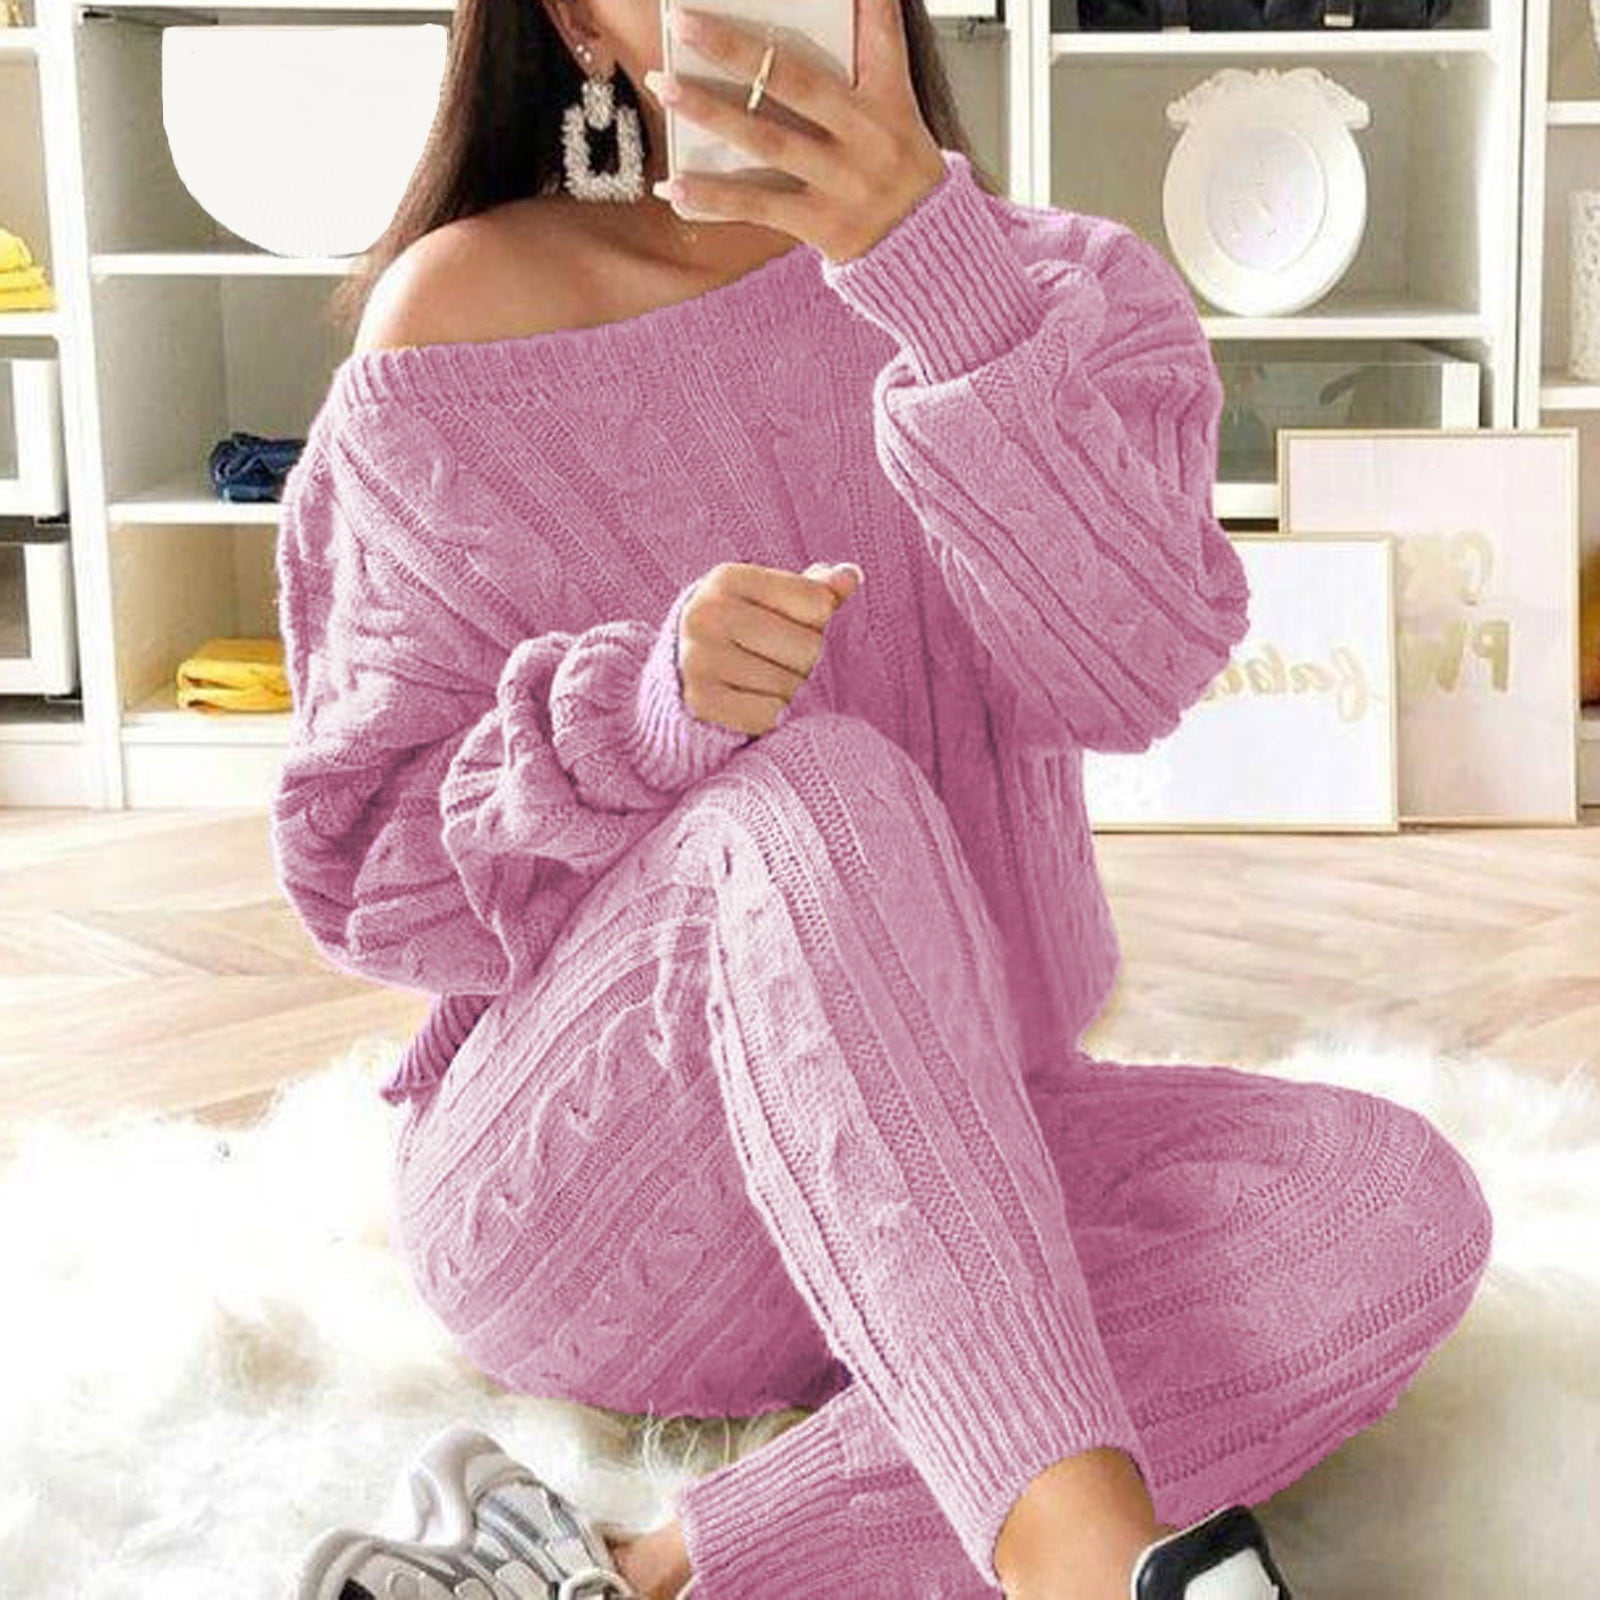 New Womens Ladies Cable Knit Knitted Warm 2pc loungewear set Casual Tracksuit UK 